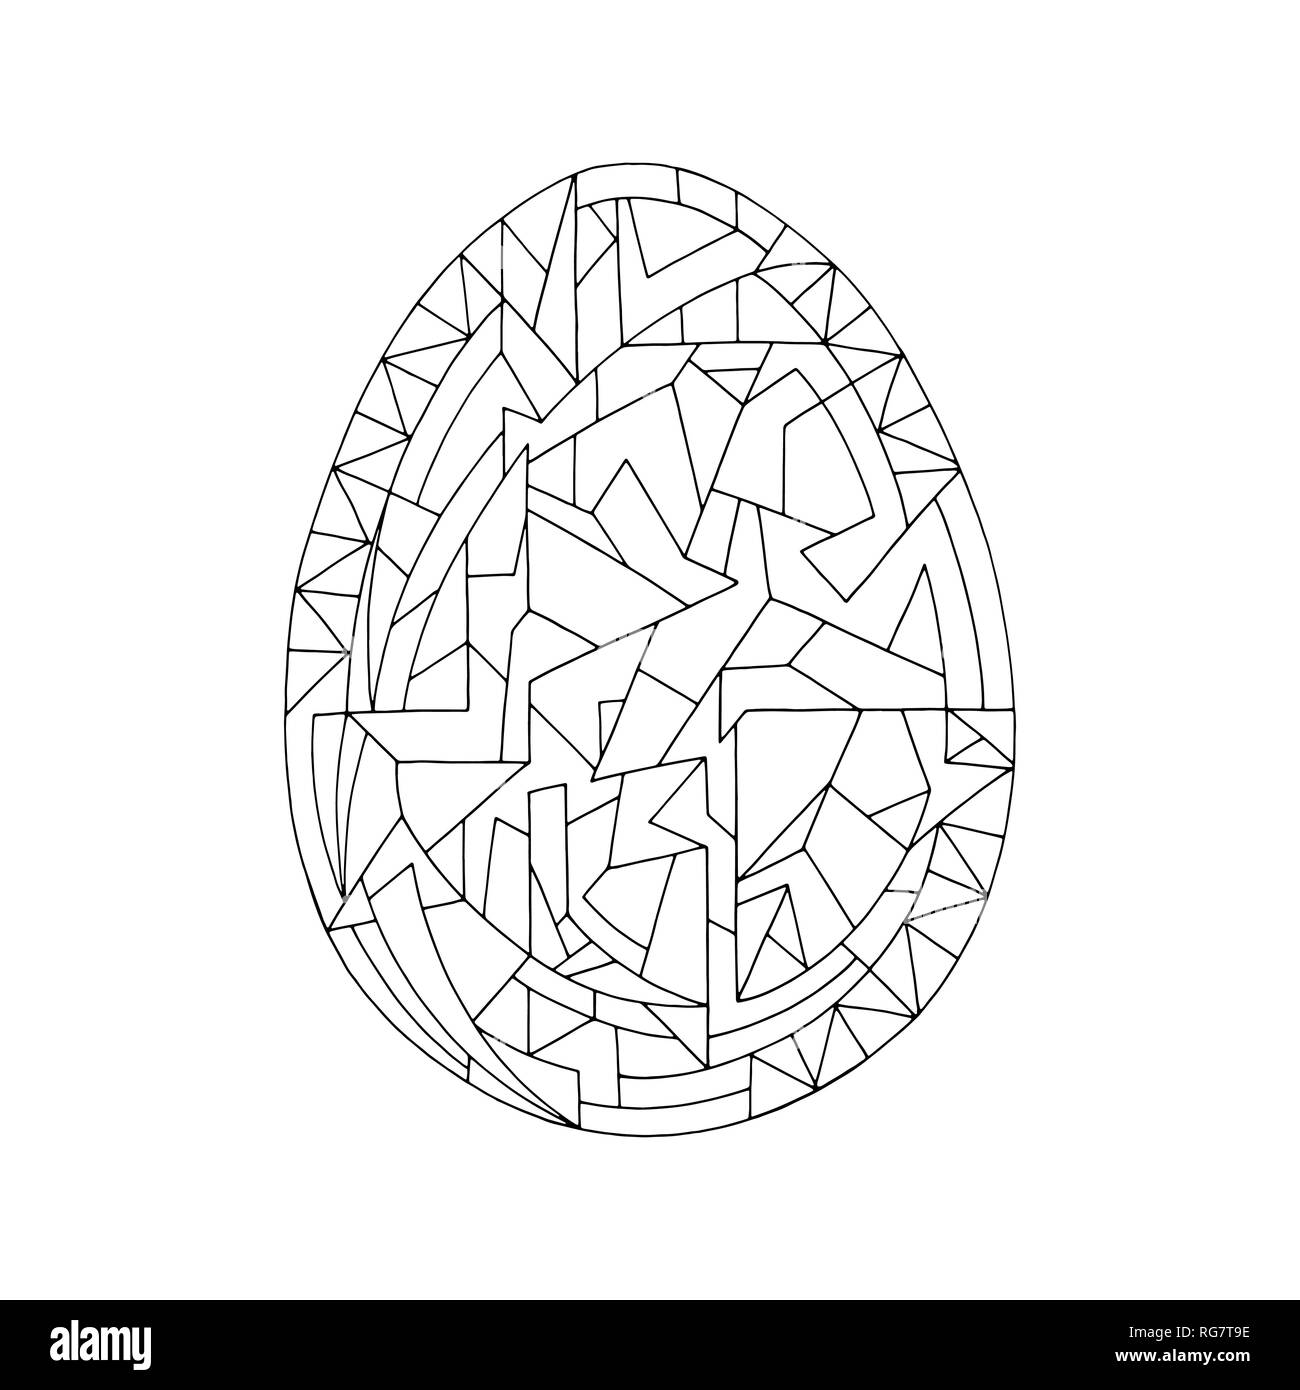 Easter egg coloring book vector illustration. Hand drawn abstract holidays object in contemporary style. Stock Vector